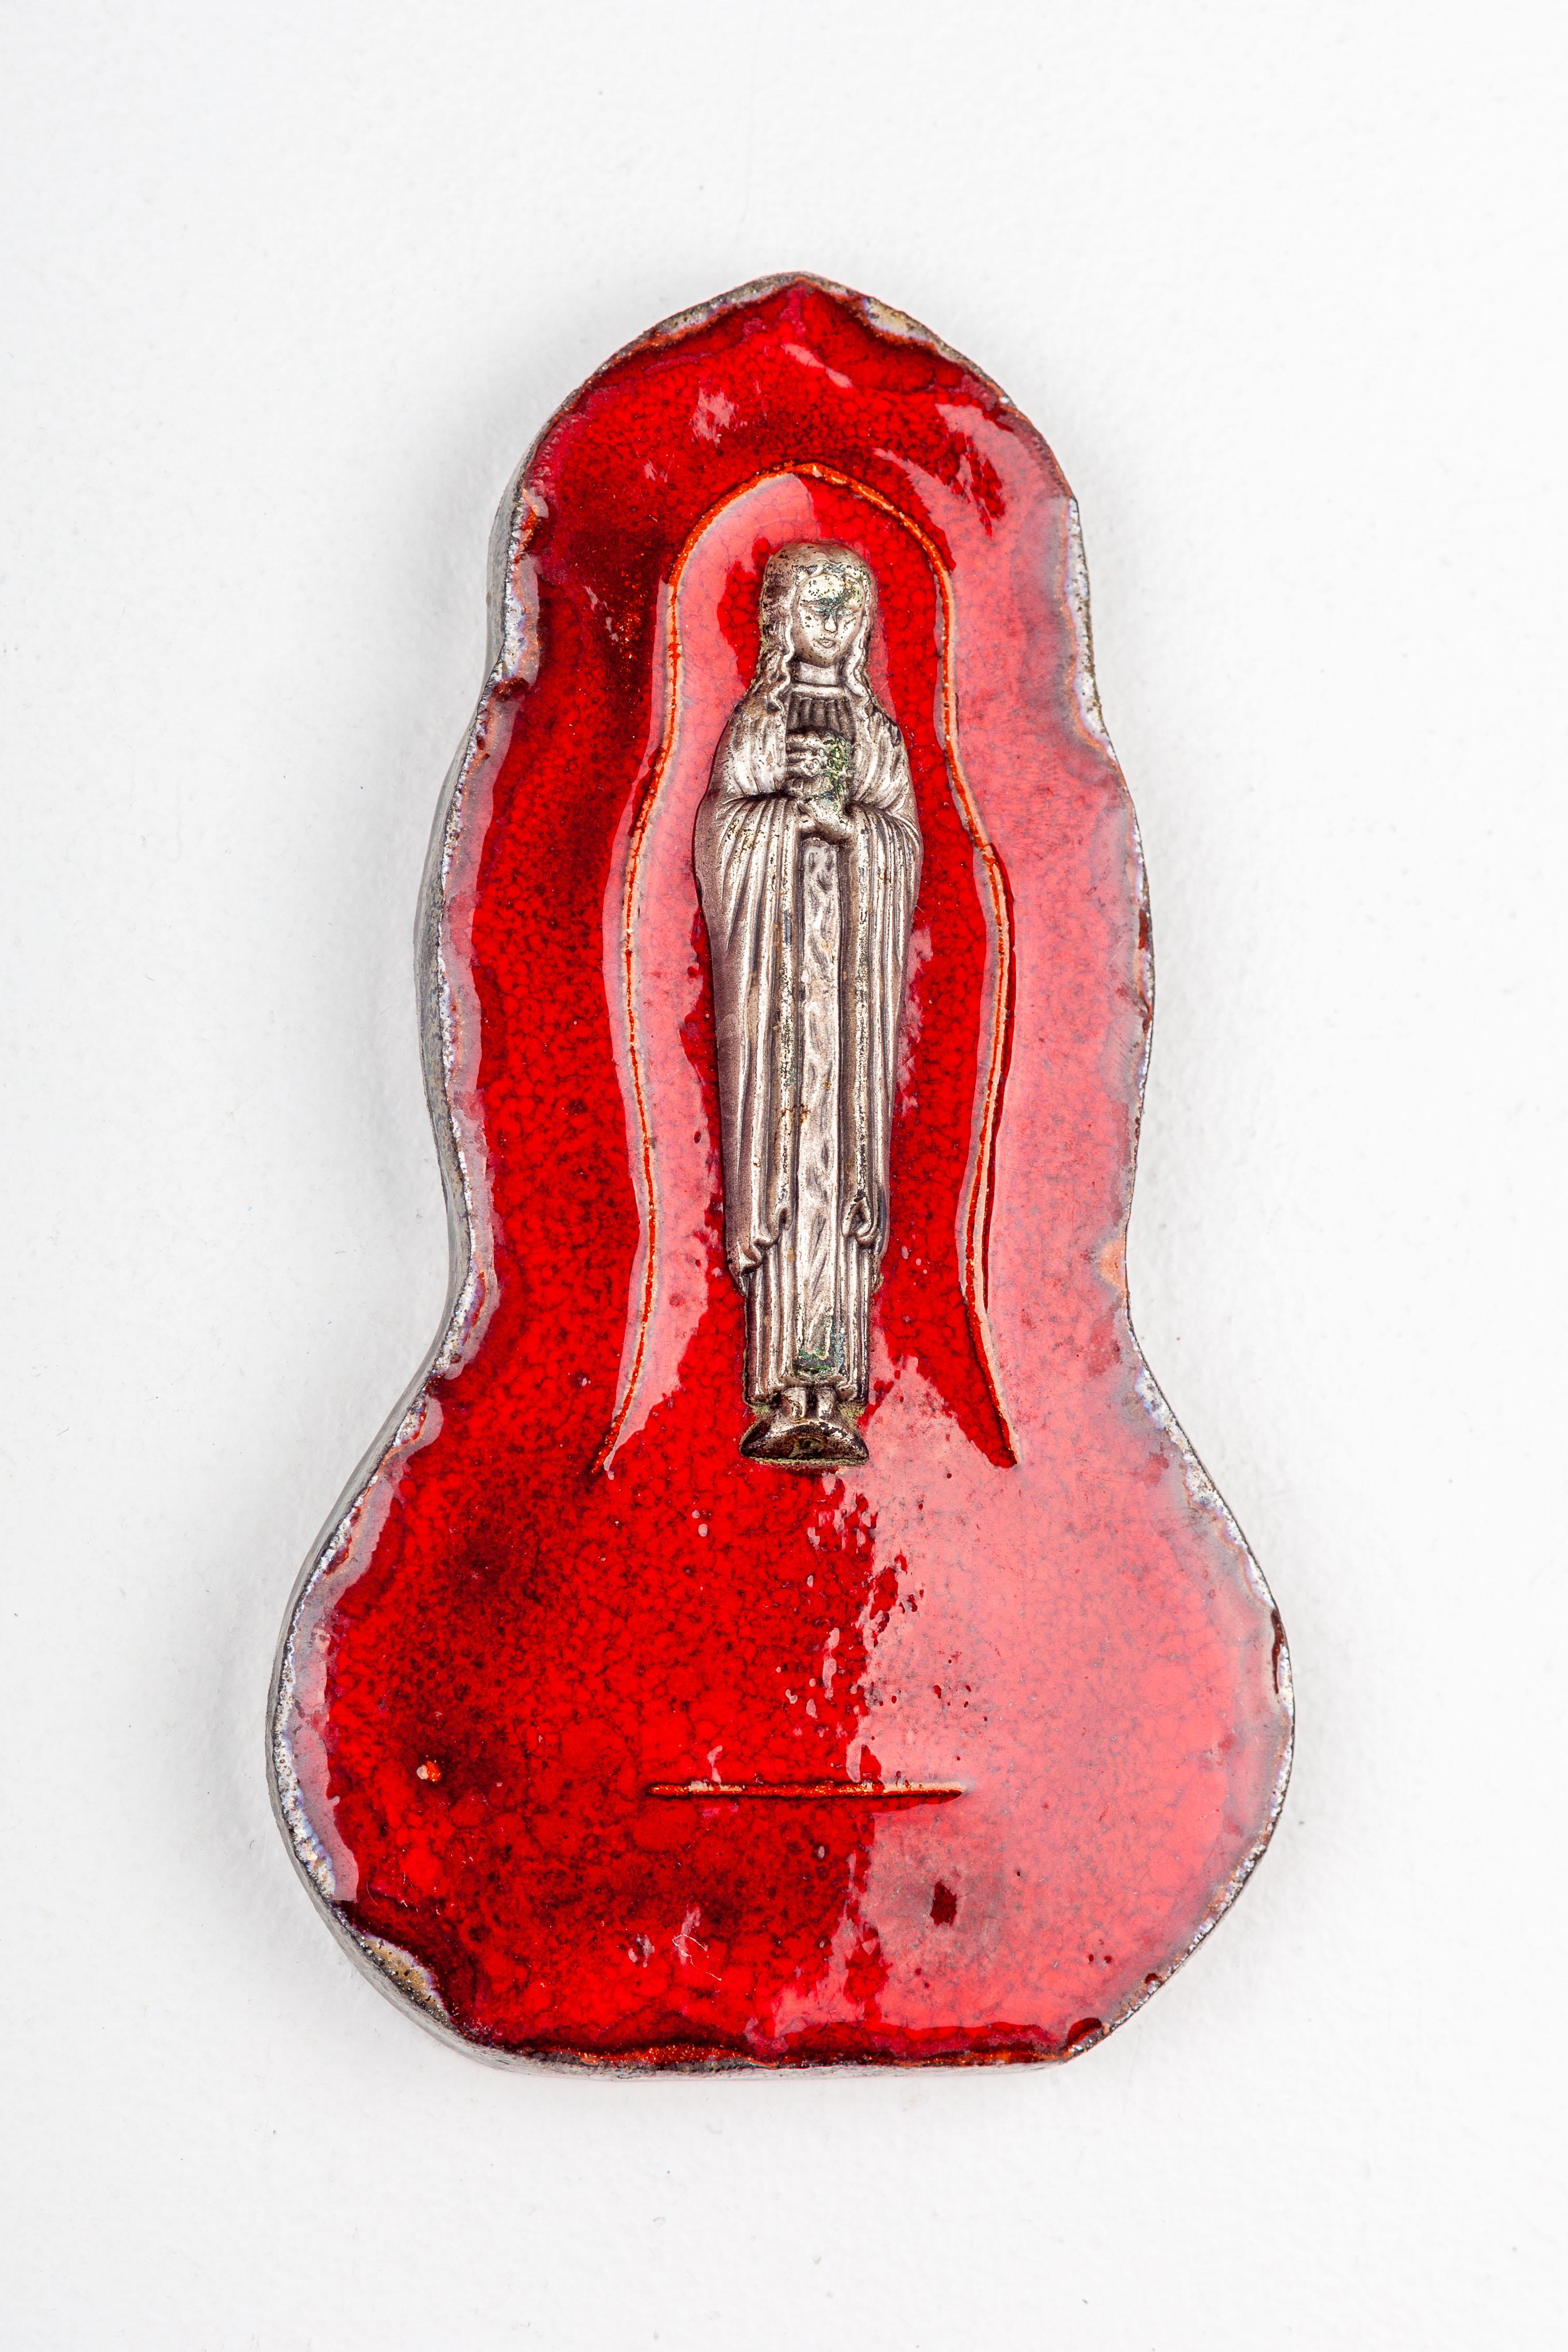 This midcentury ceramic wall plaque features a metal Virgin Mary statuette. The ceramic plaque is adorned with a painted red lava texture, evoking a sense of mysticism that mirrors the mental landscape of the Virgin Mary. The juxtaposition of the